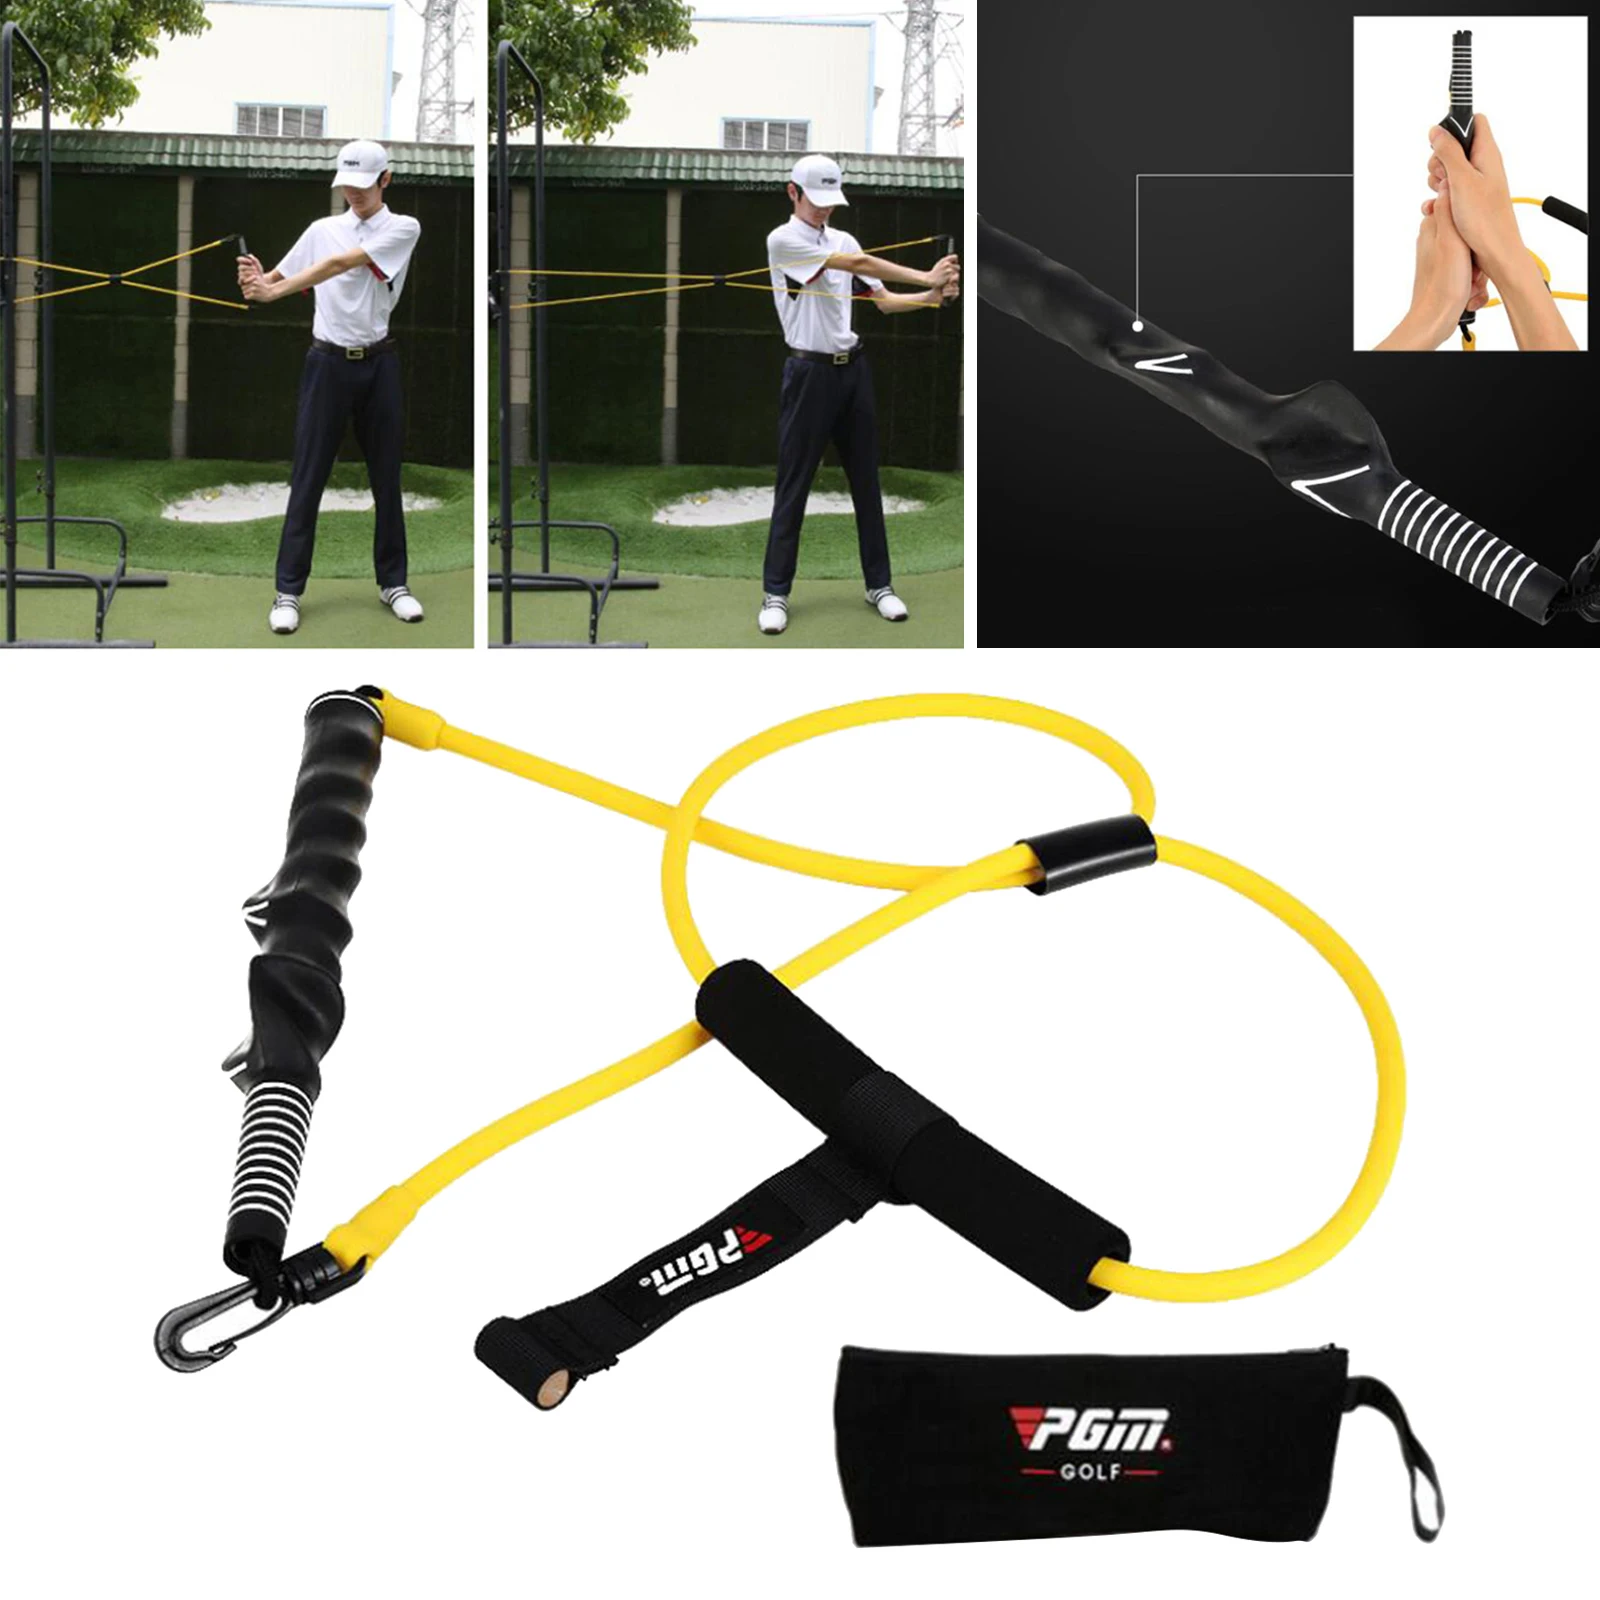 Golf Training Aid Belt Golf Swing Training Device - Exerciser Resistance Bands Workout Strength Mobility Training Exercise